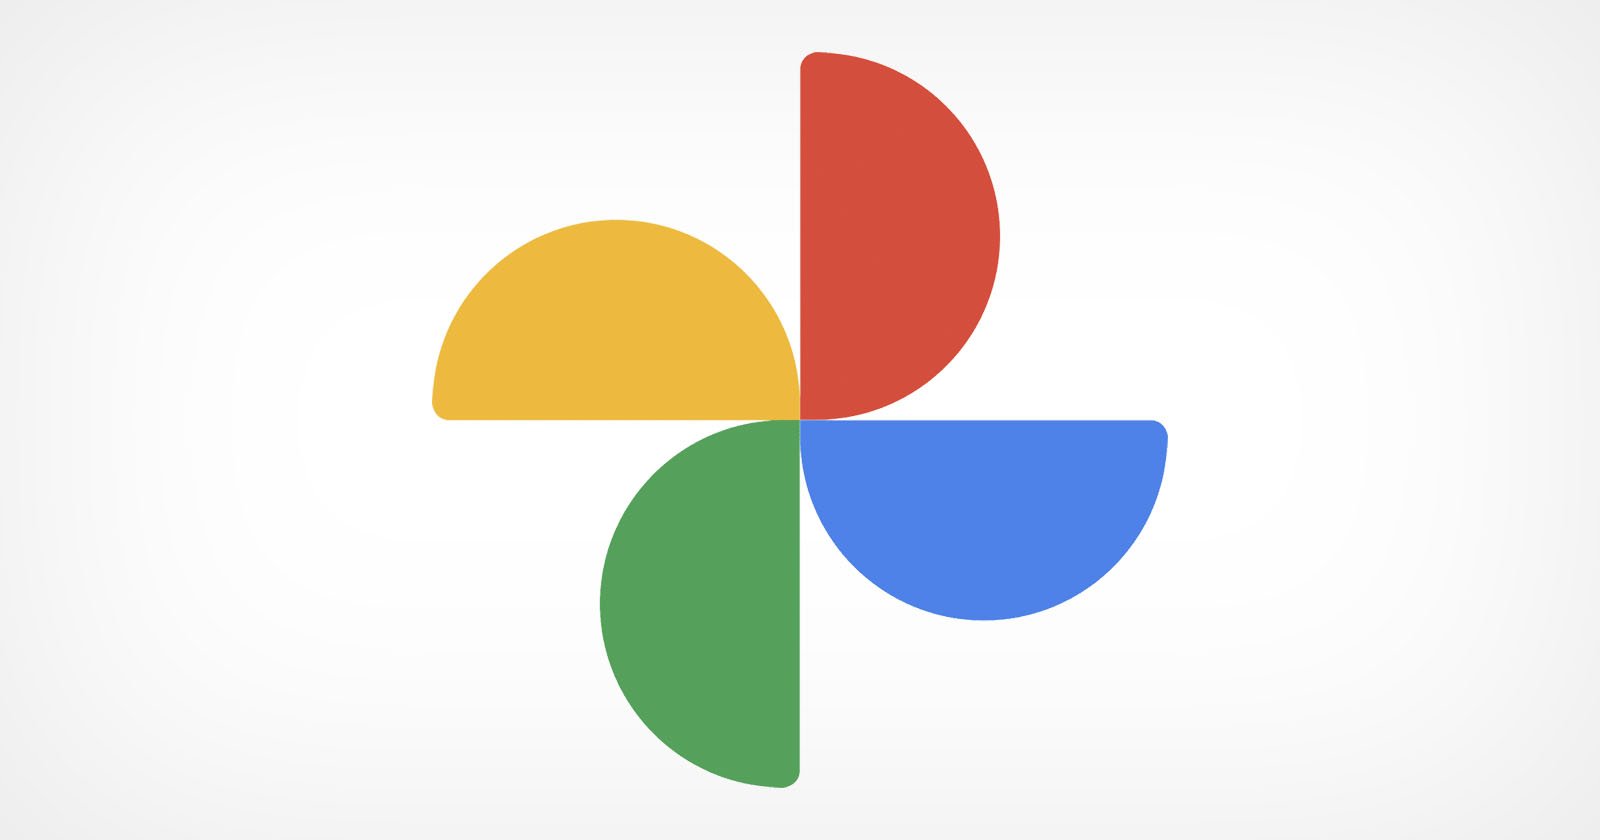 Google Photos is Testing Better Search That Supports Complex Queries